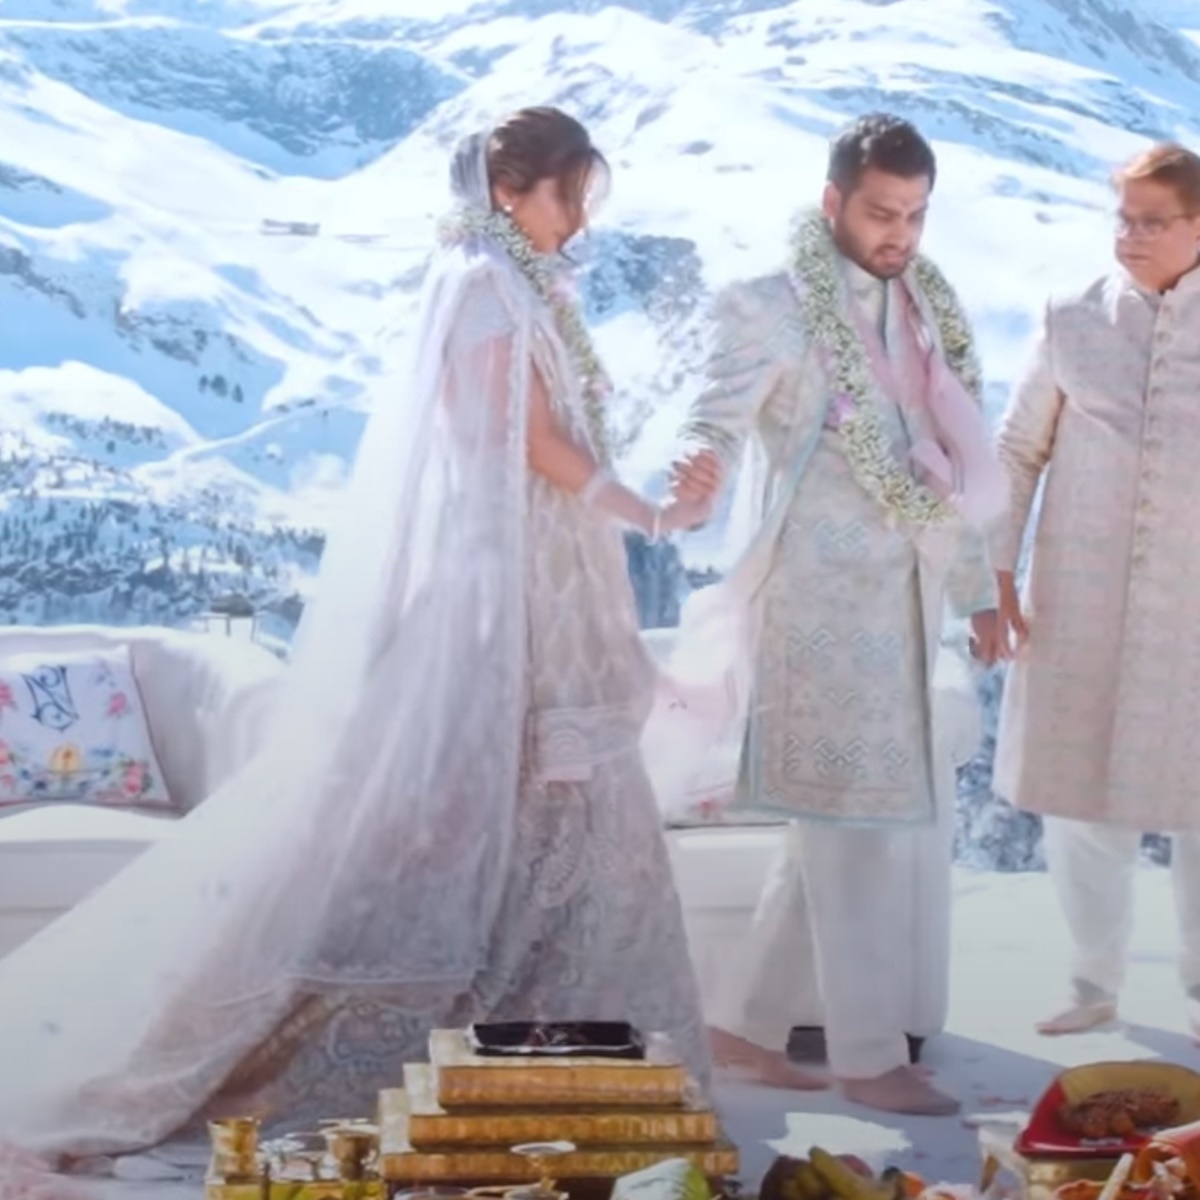 A magical desi wedding in snow-capped mountains